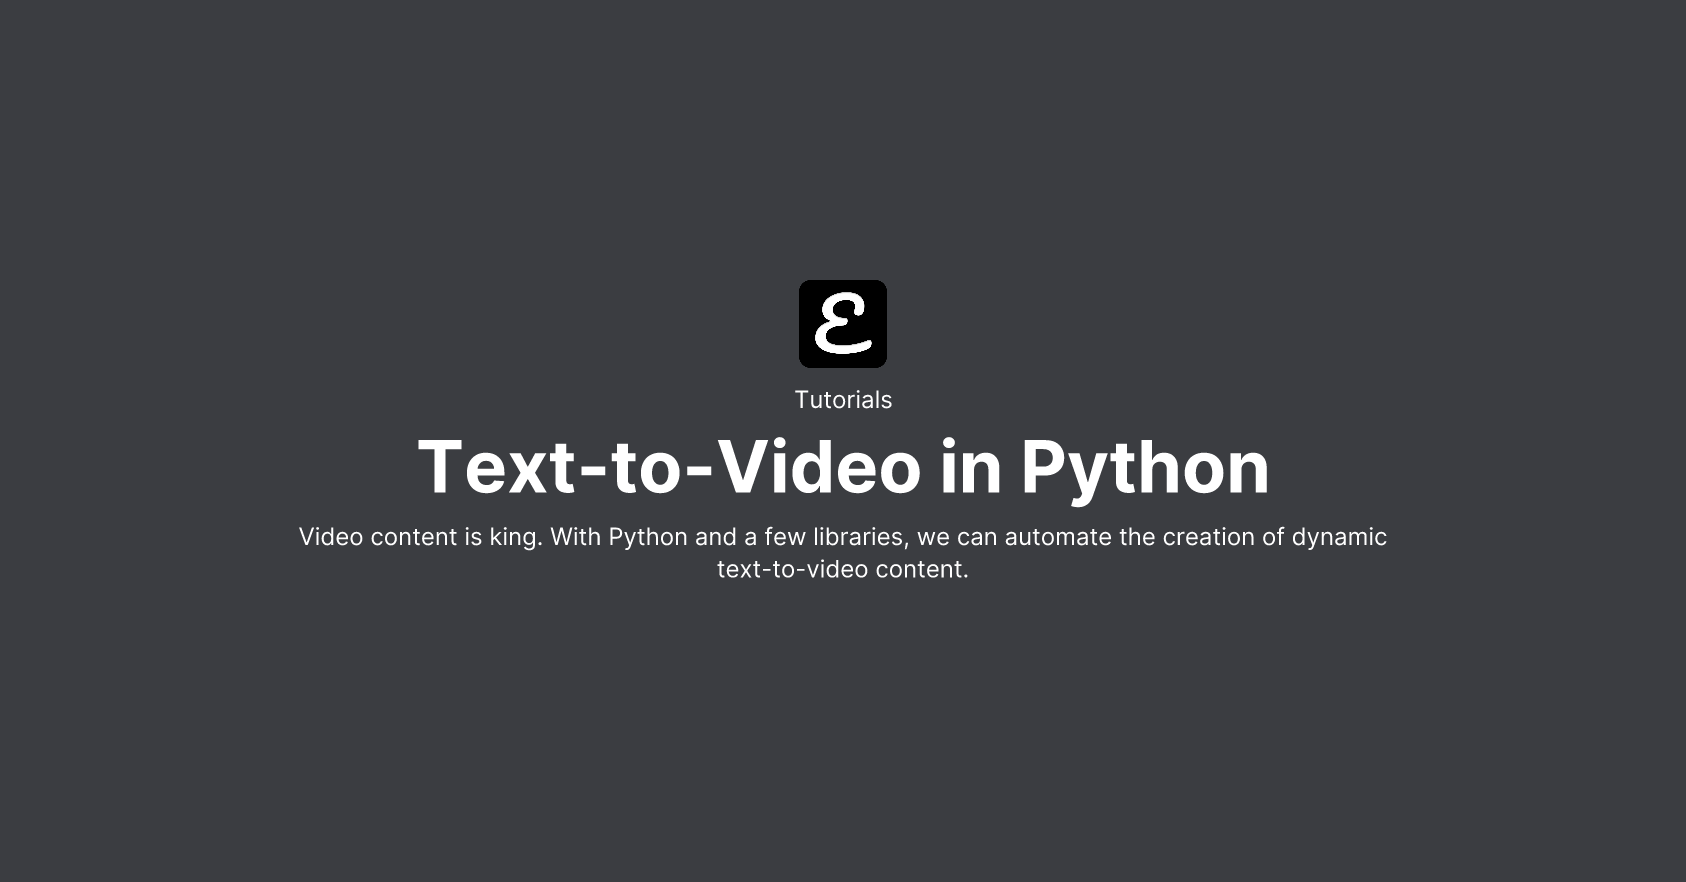 Text-to-Video in Python by Eric David Smith